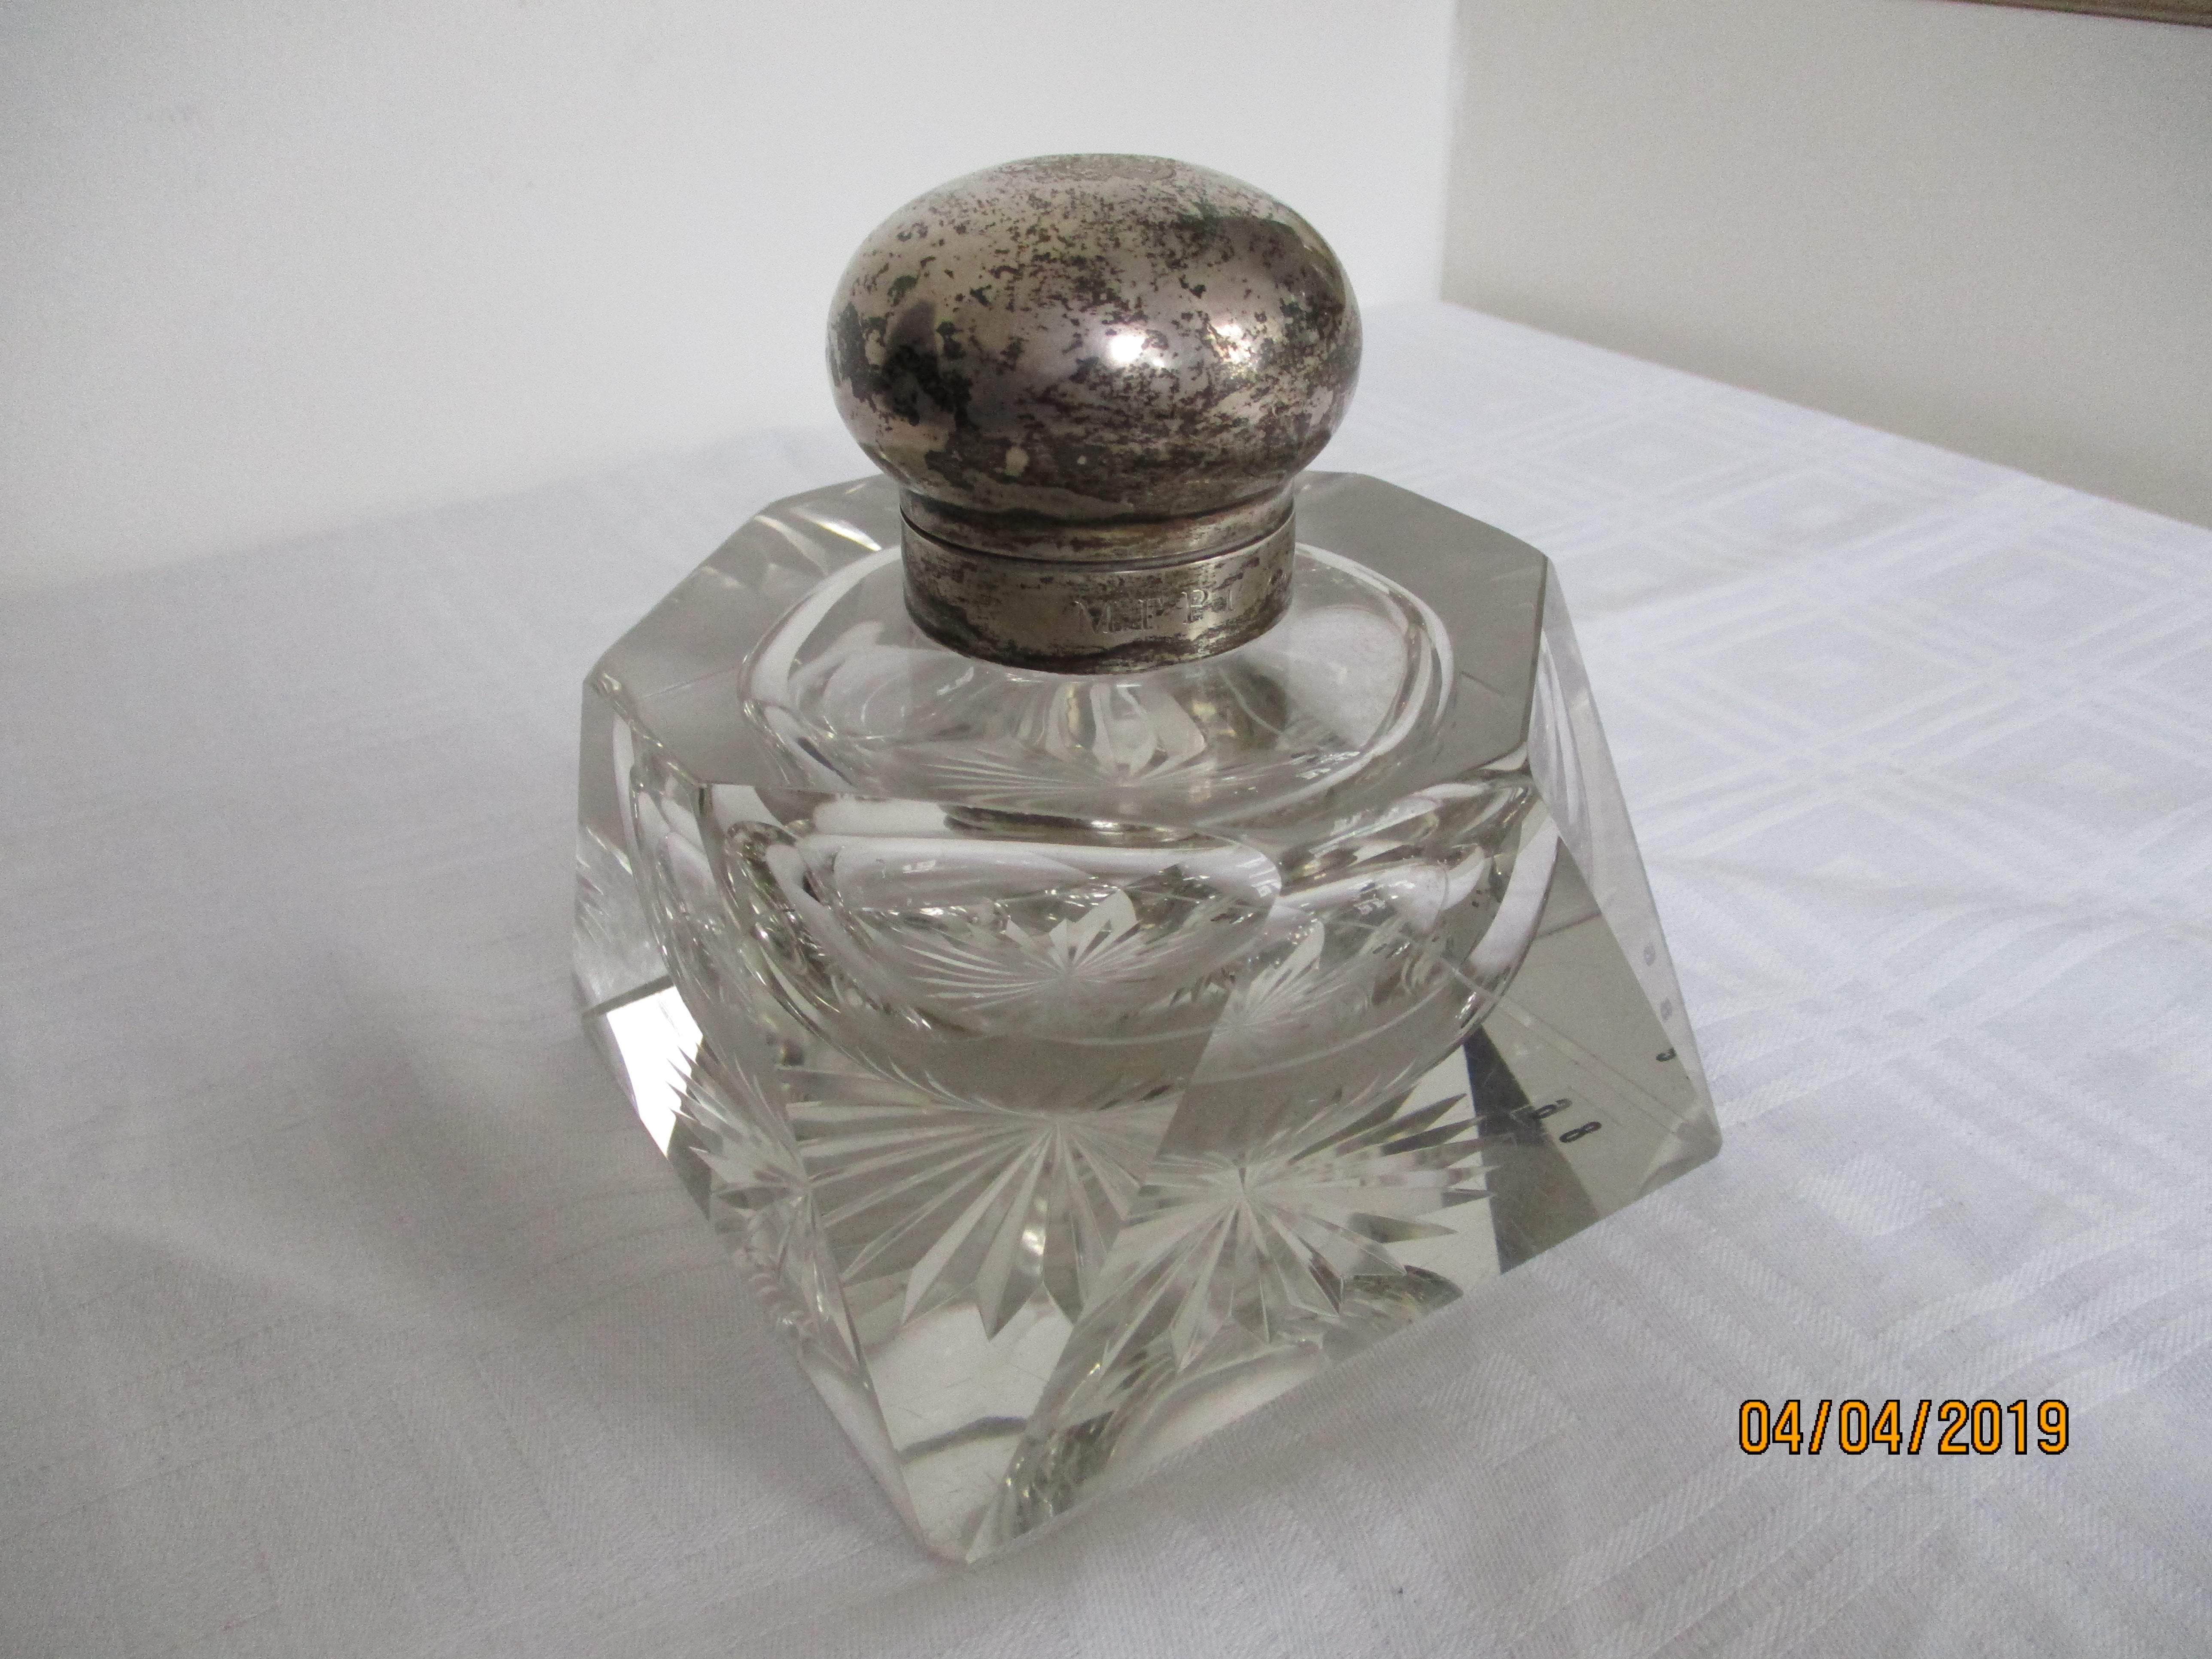 A very nice example of a large glass inkwell with silver marked lid with a hallmark ingraved. To the back of the lid under the hinge are initials and a makers marks. The ingravings are, as far as readable, reading 